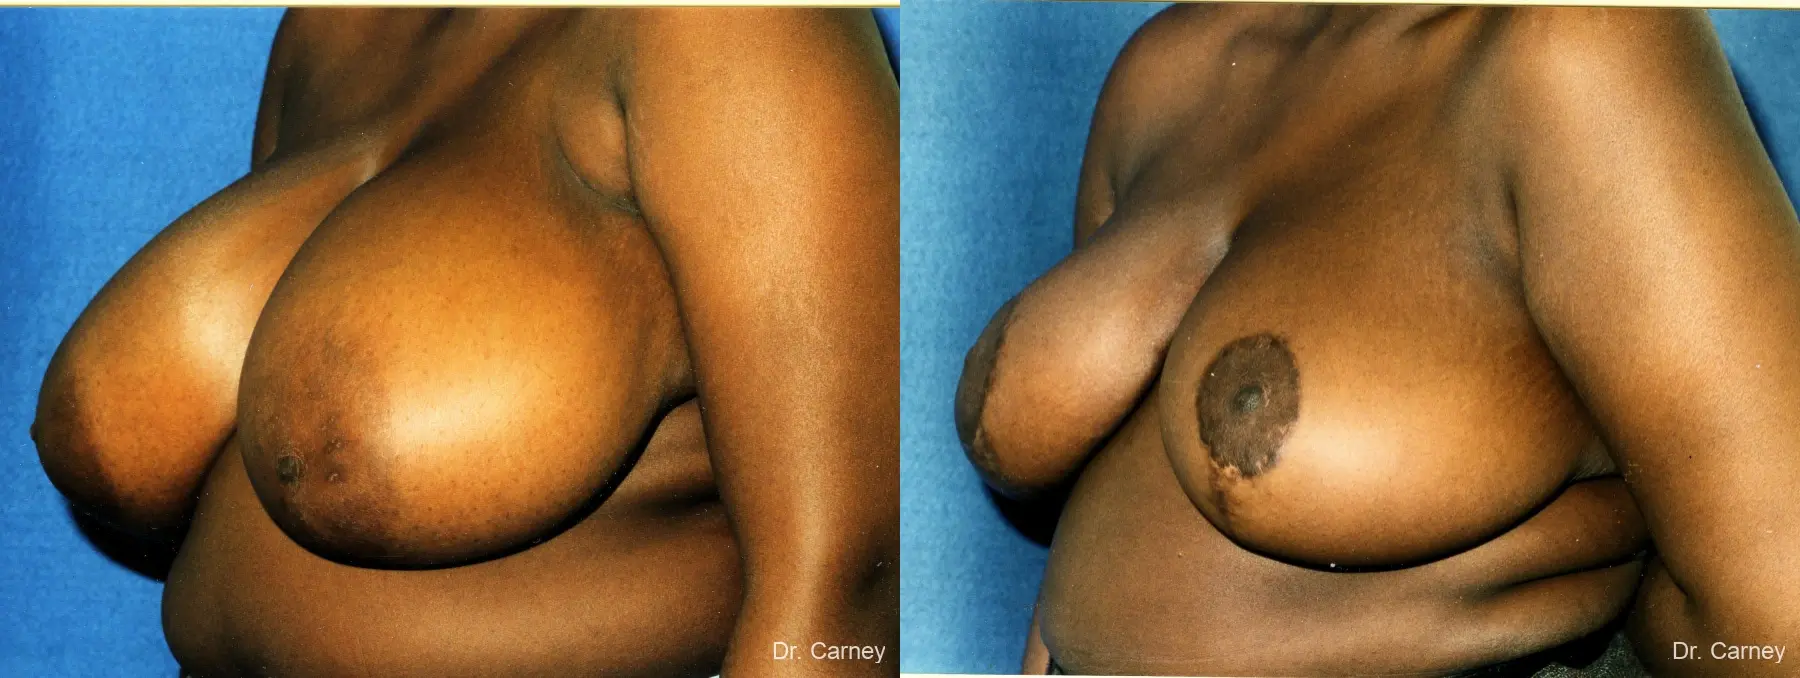 Virginia Beach Breast Reduction 1233 - Before and After